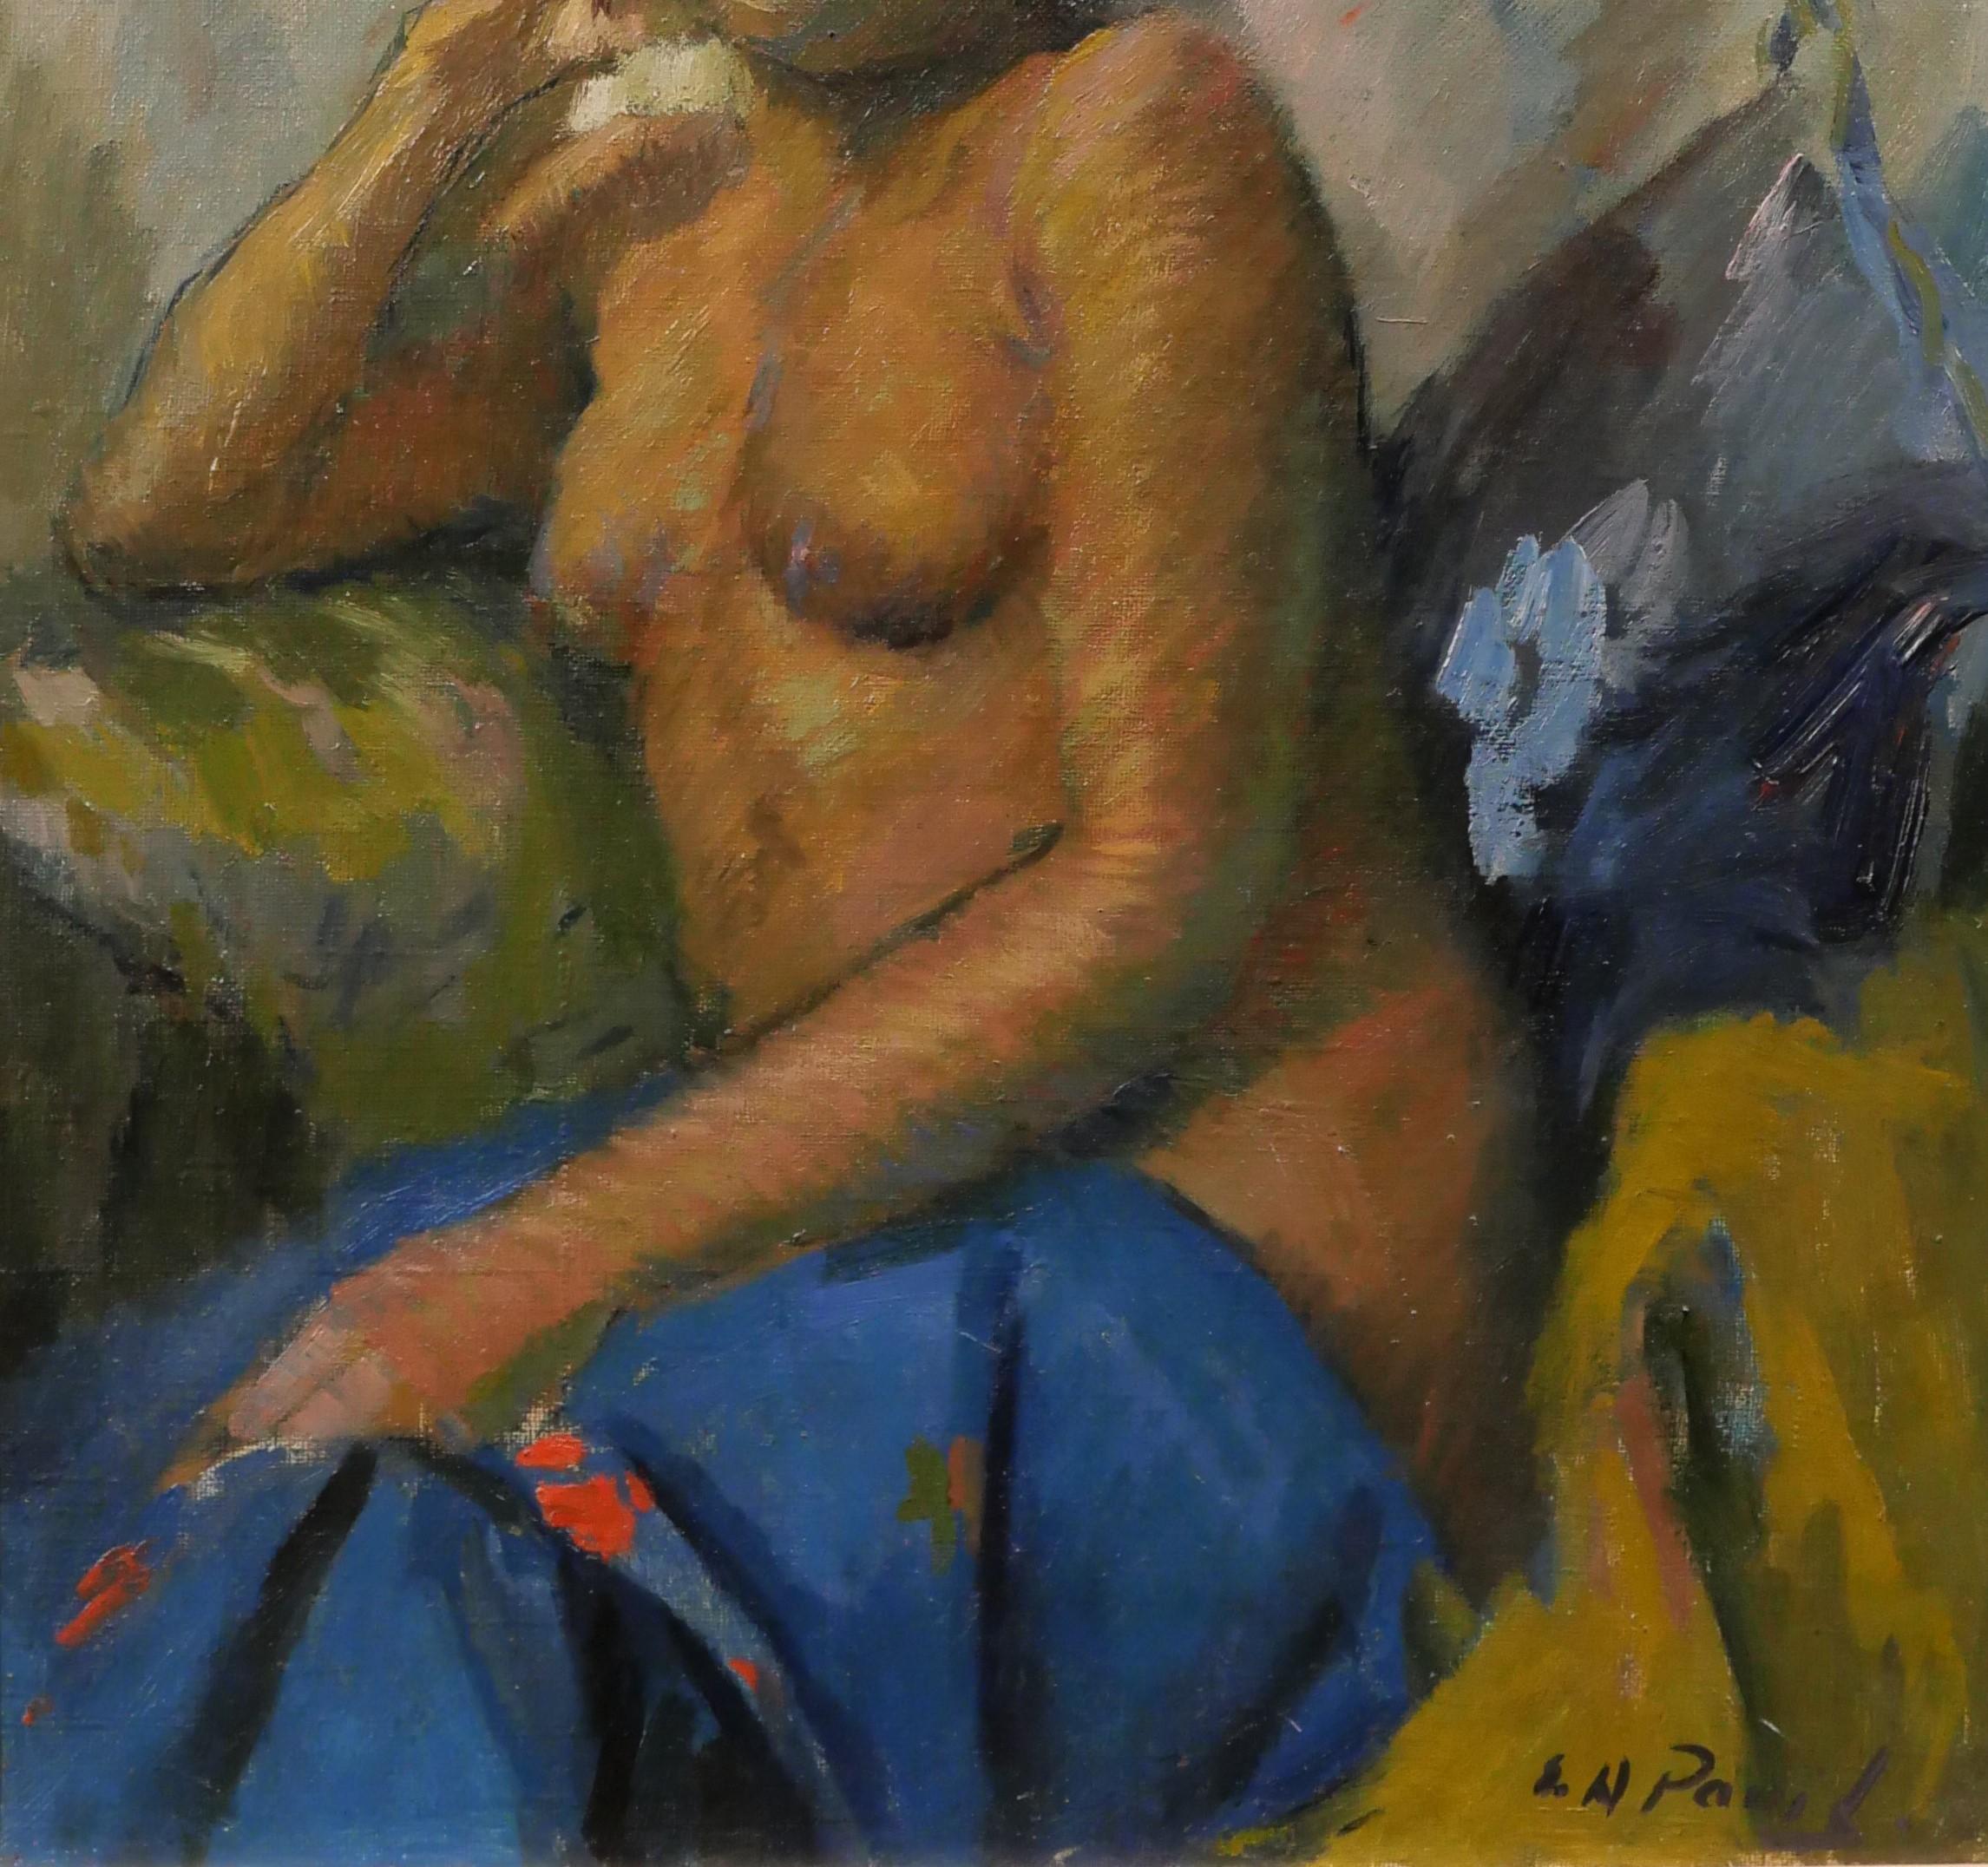 Elie Anatole PAVIL
1873-1948
The Martinican nude woman
Painting, oil on canvas
Signed
Painting: 41 x 33 cm (16.1 x 13 inches)
Modern natural oak frame (American box): 51 x 43 cm (20.1 x 16.9 inches)
Very good condition
On the back, an exhibition